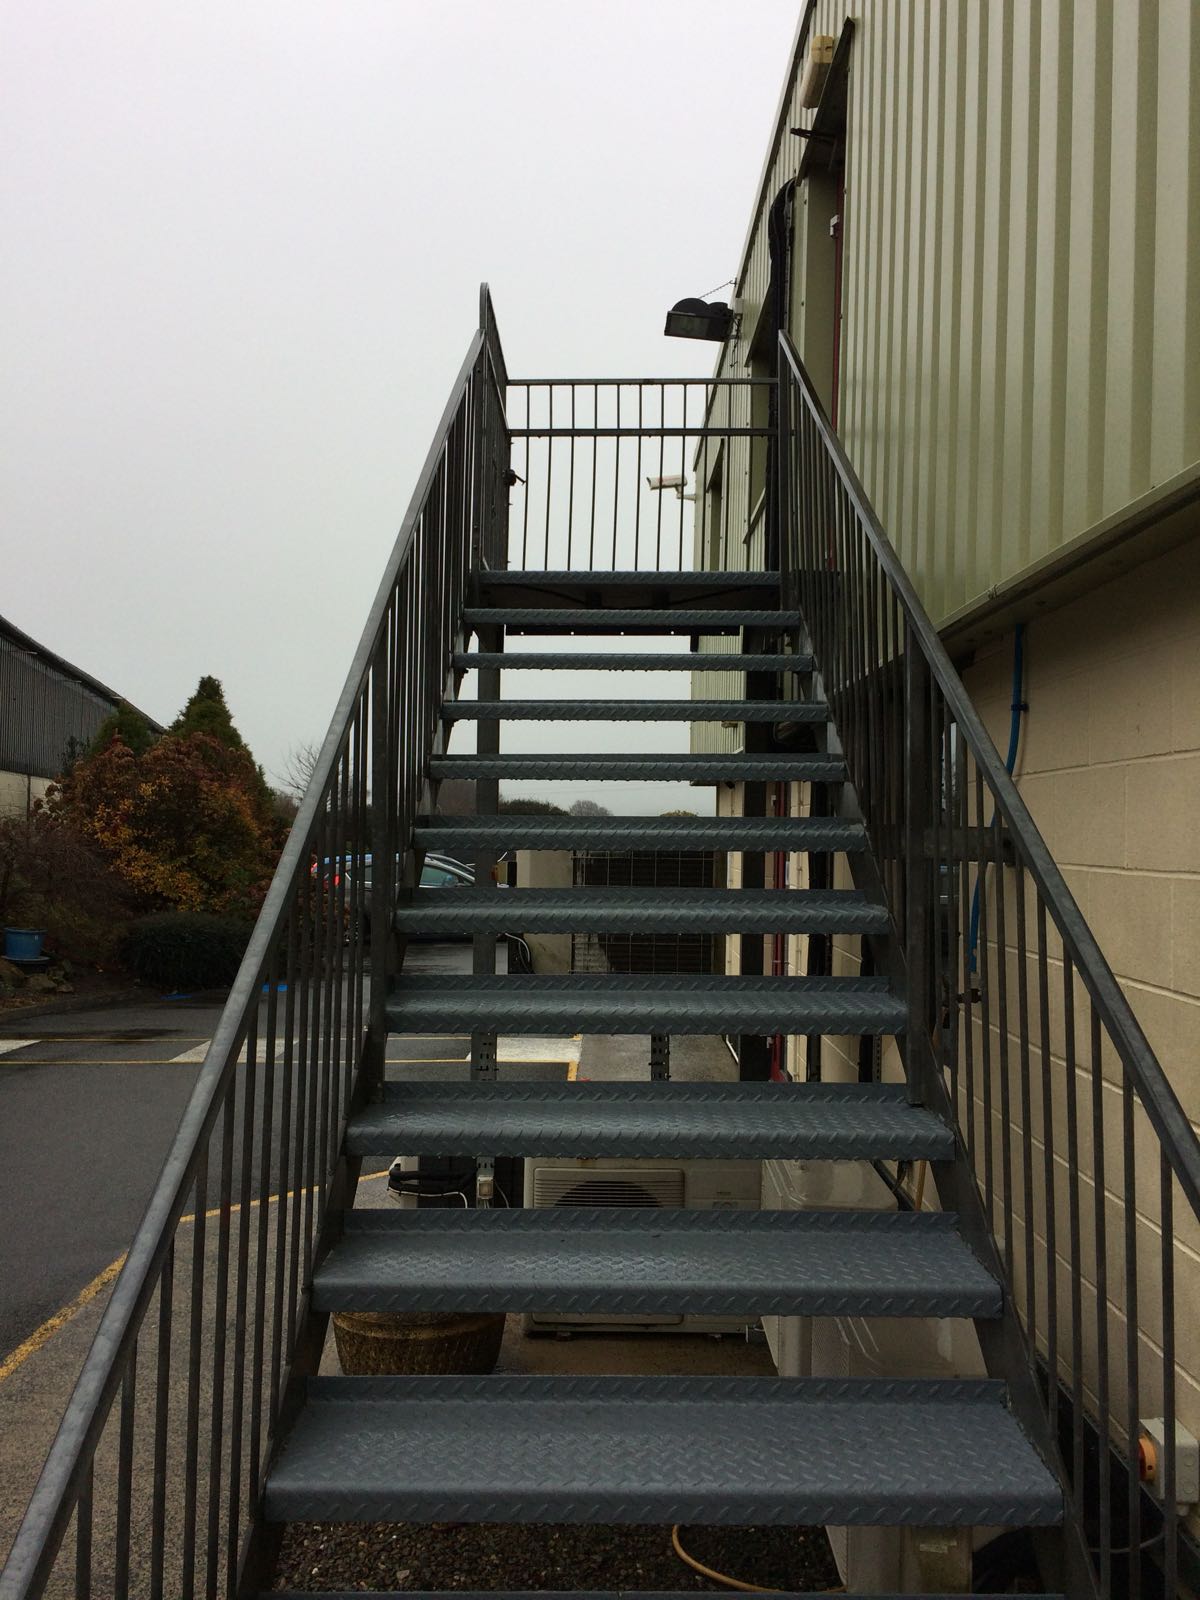 Staircase with small landings